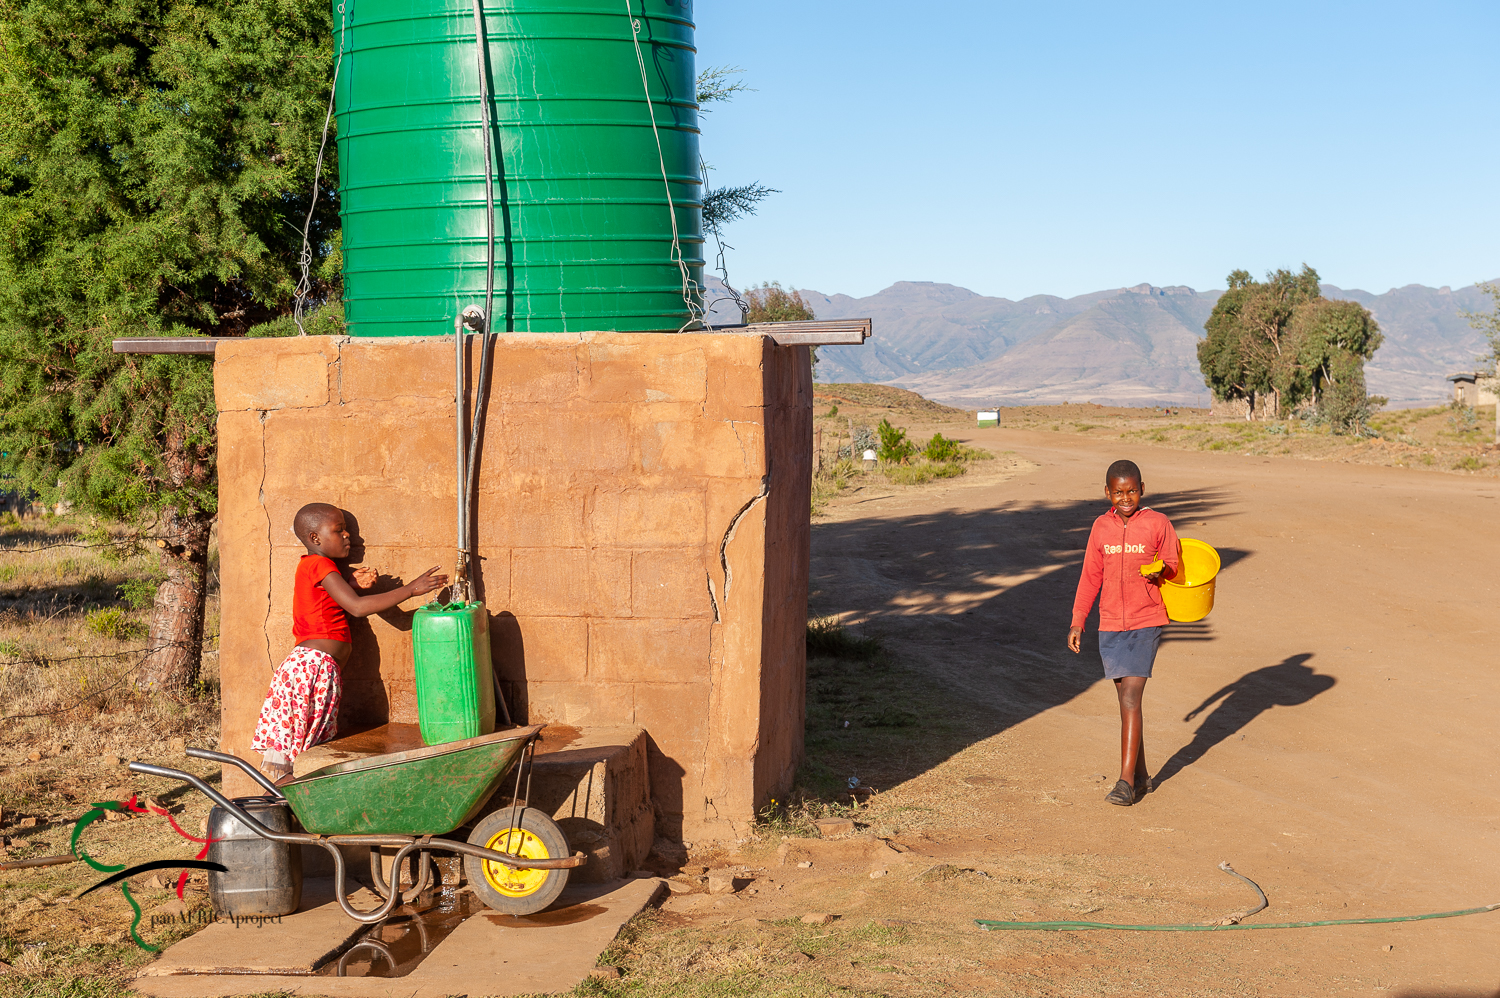 Children filling up containers at water tank